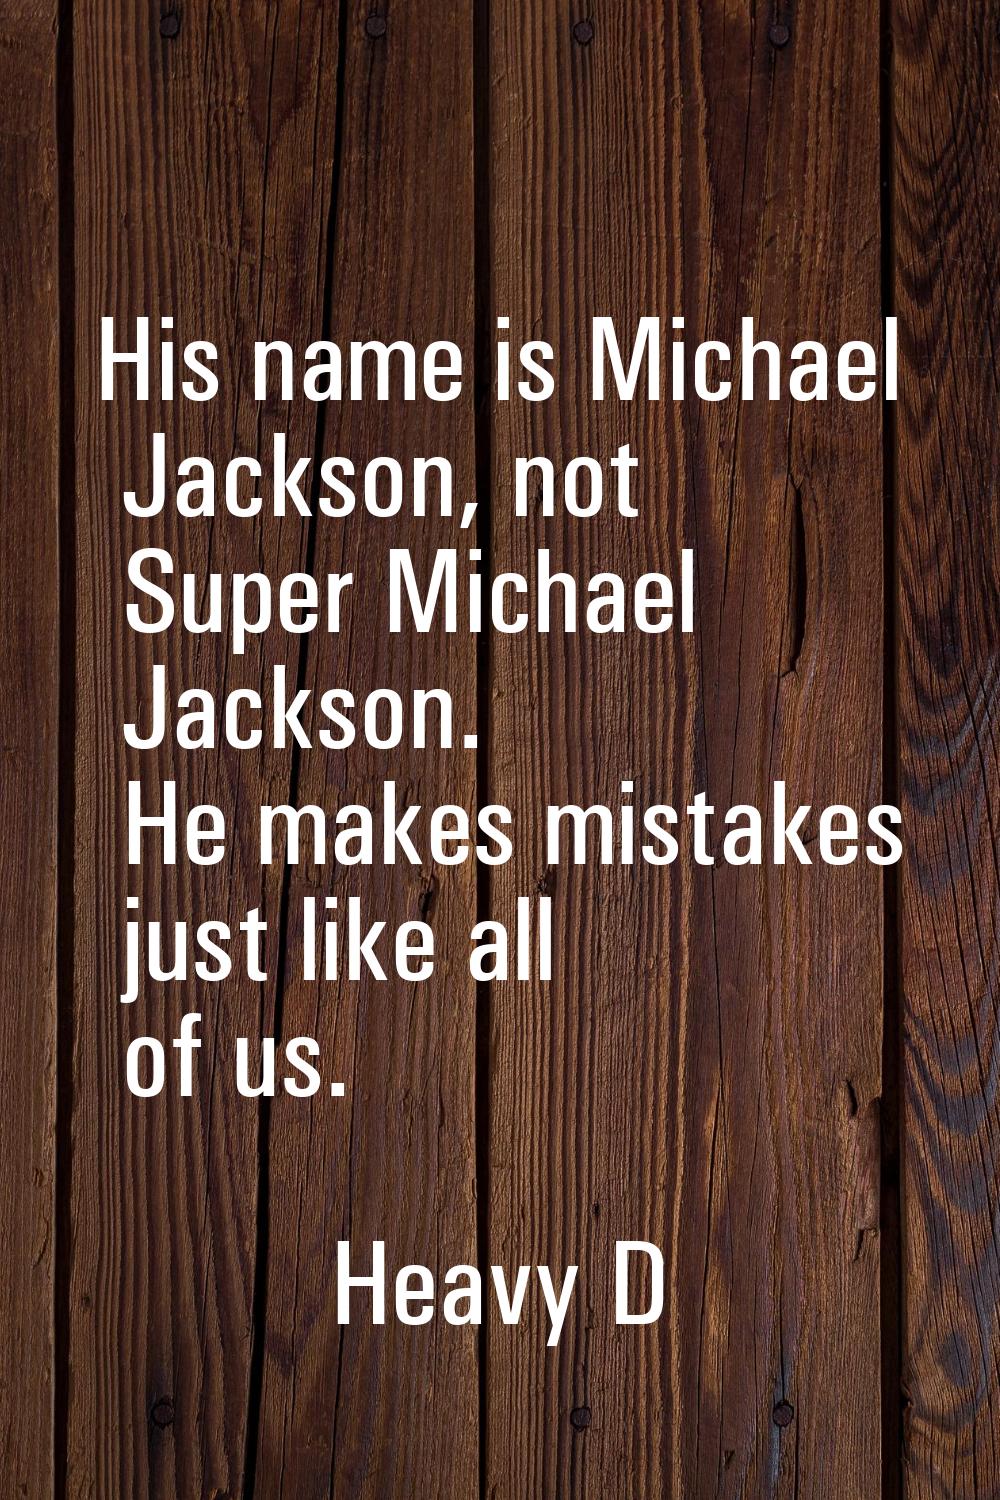 His name is Michael Jackson, not Super Michael Jackson. He makes mistakes just like all of us.